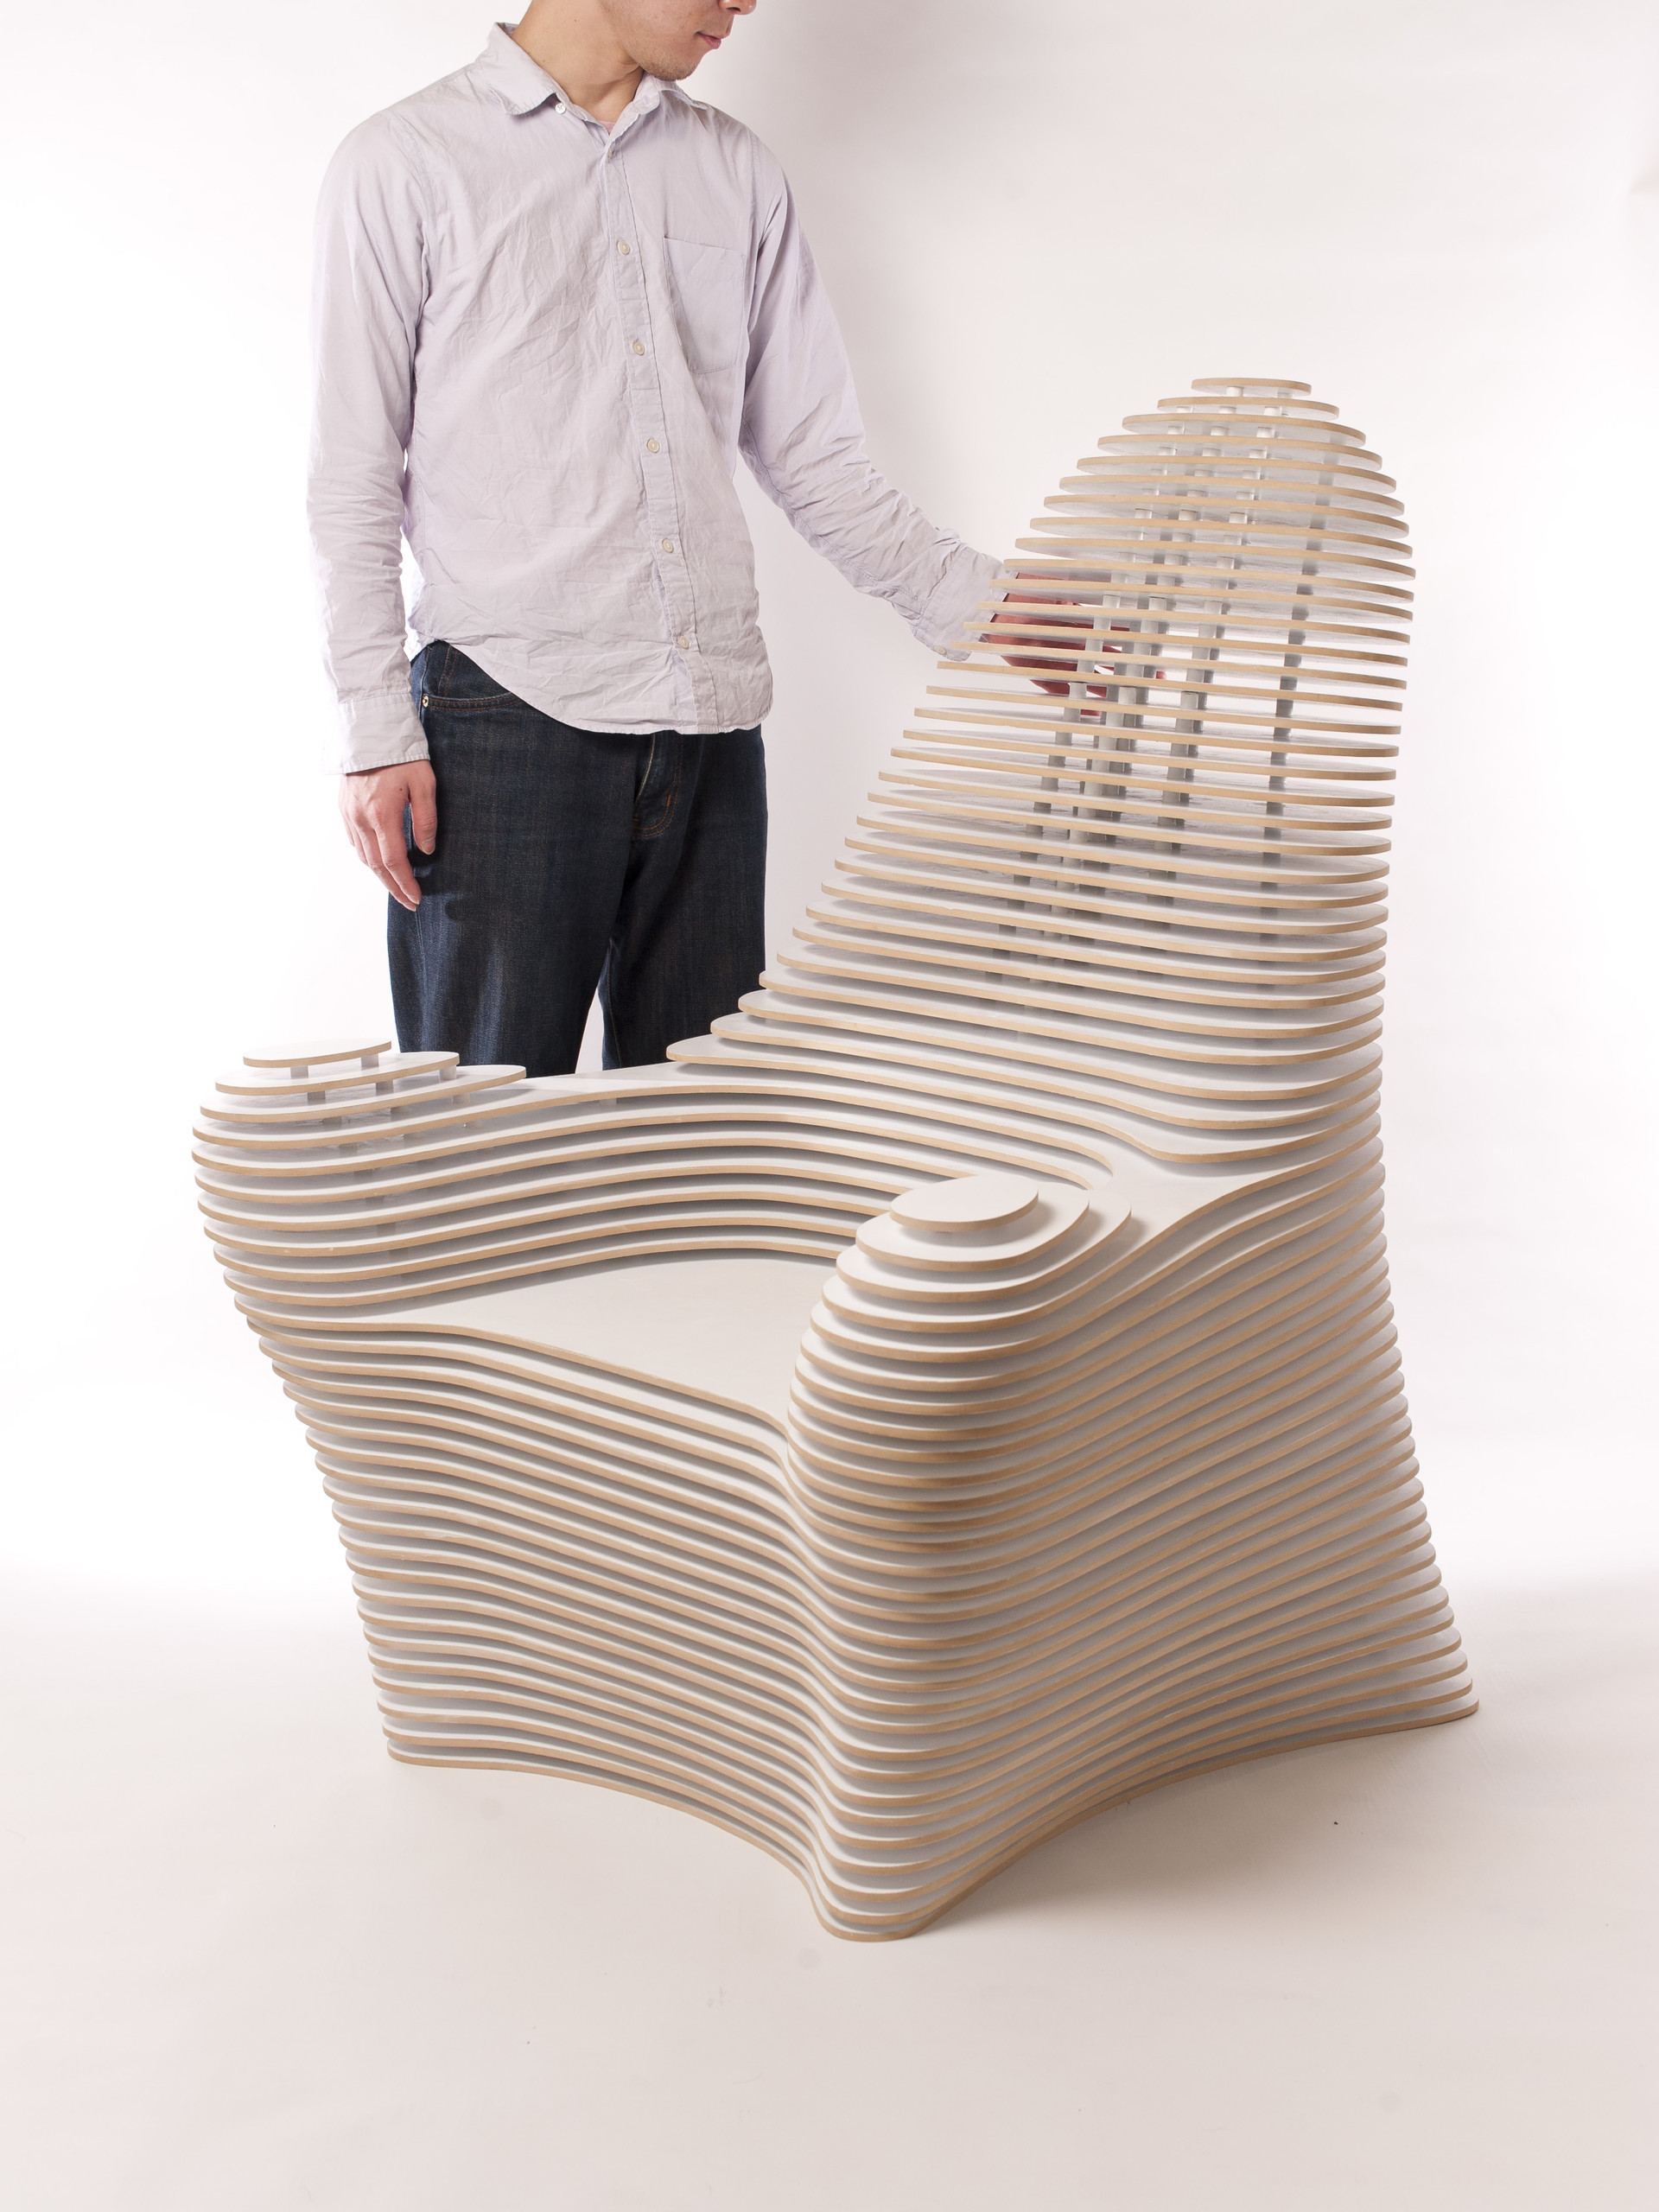 Shading Chairの建築事例写真